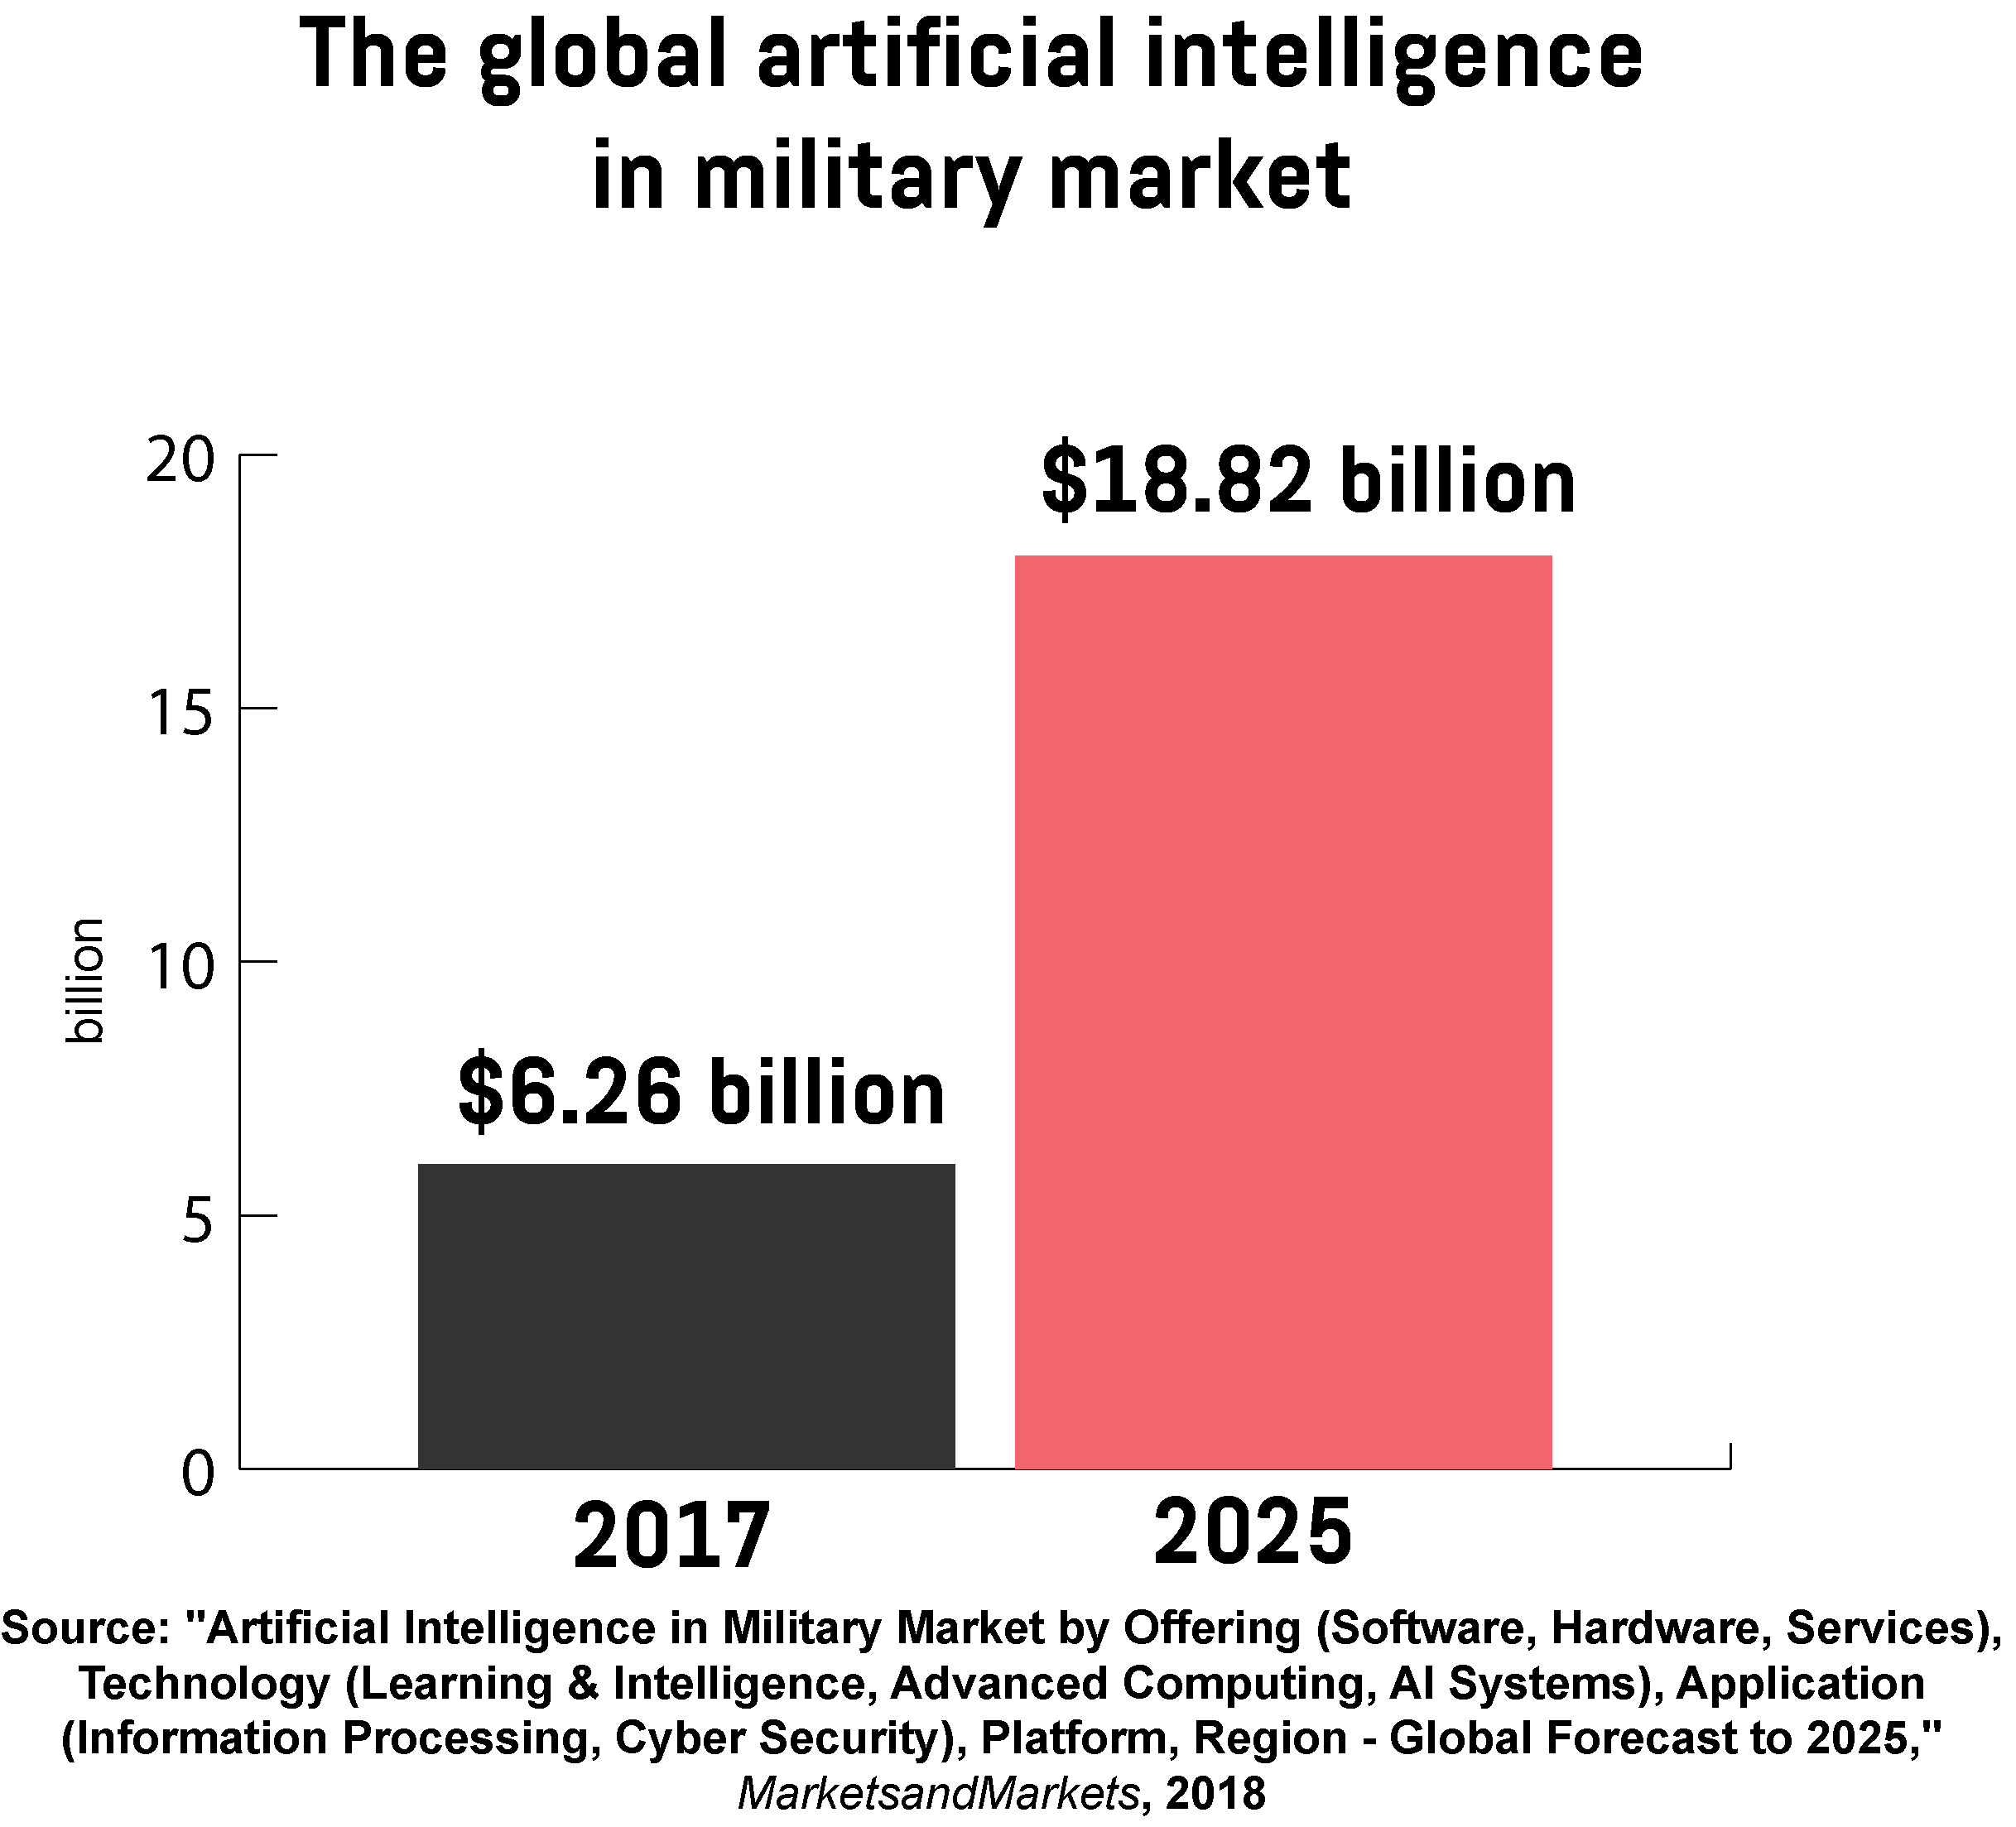  A graph showing the value of the artificial intelligence in military market in 2017, and its predicted value in 2025.